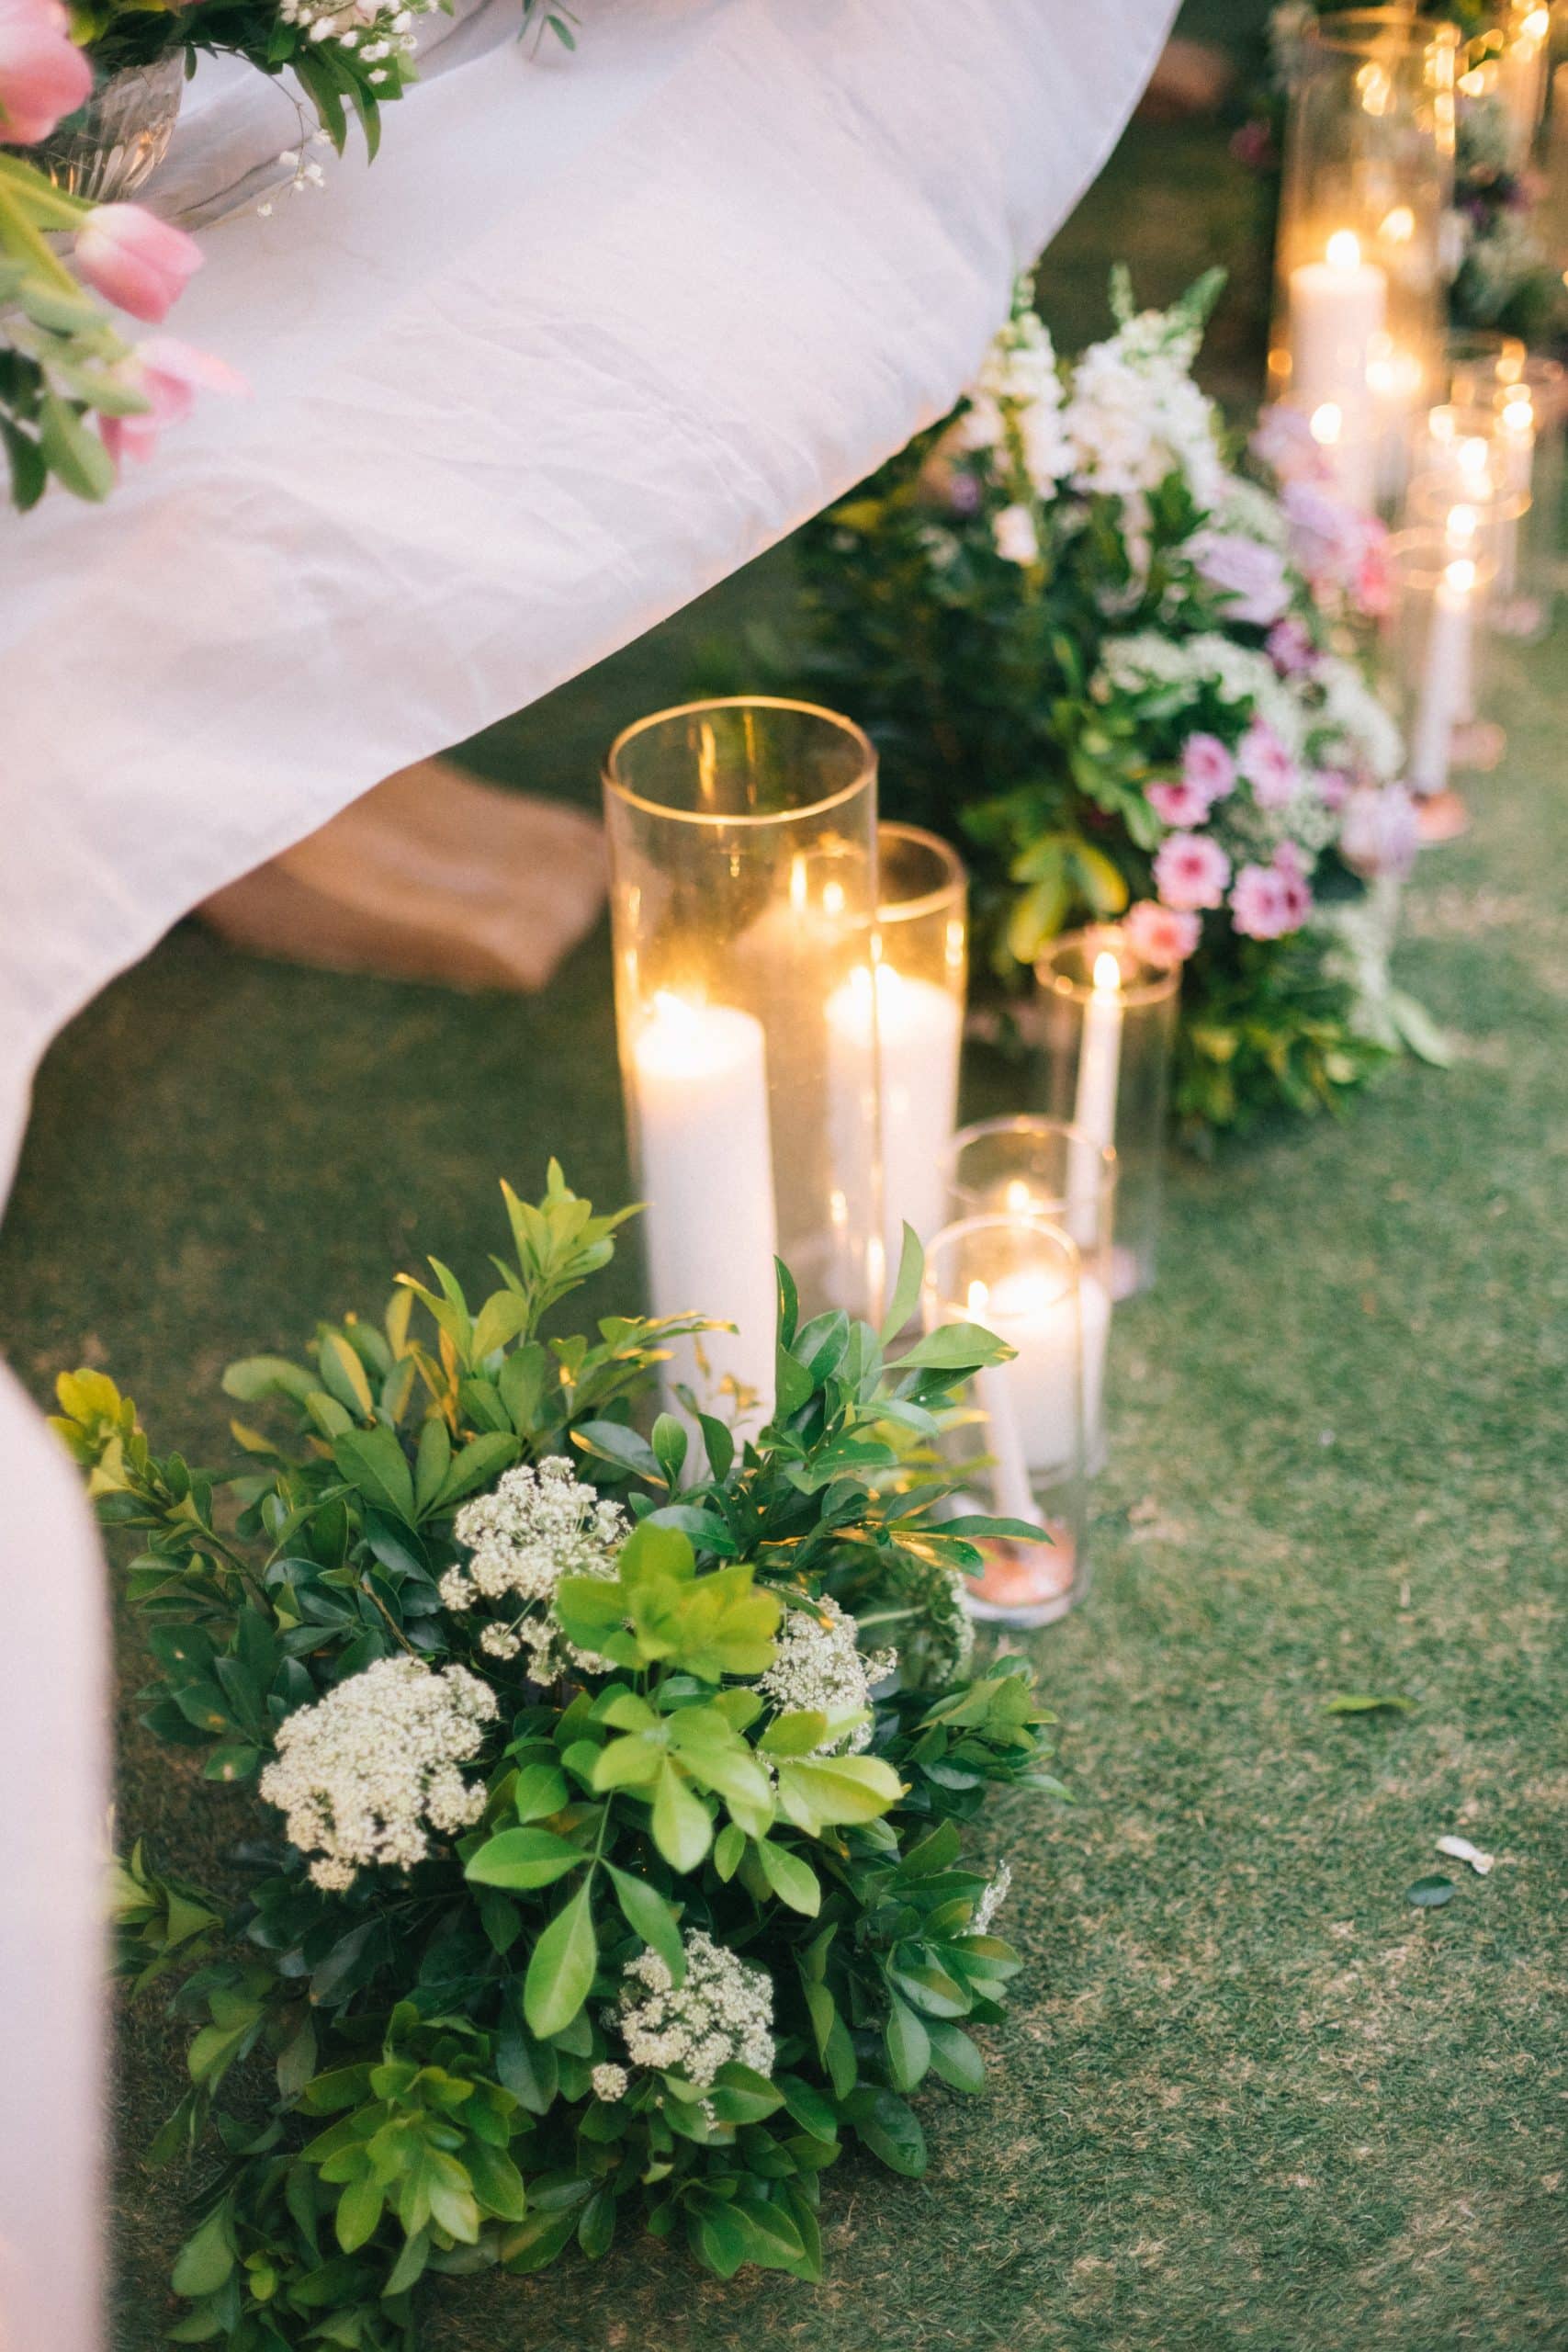 Wedding Candle Holders on the Ground | Hill City Bride